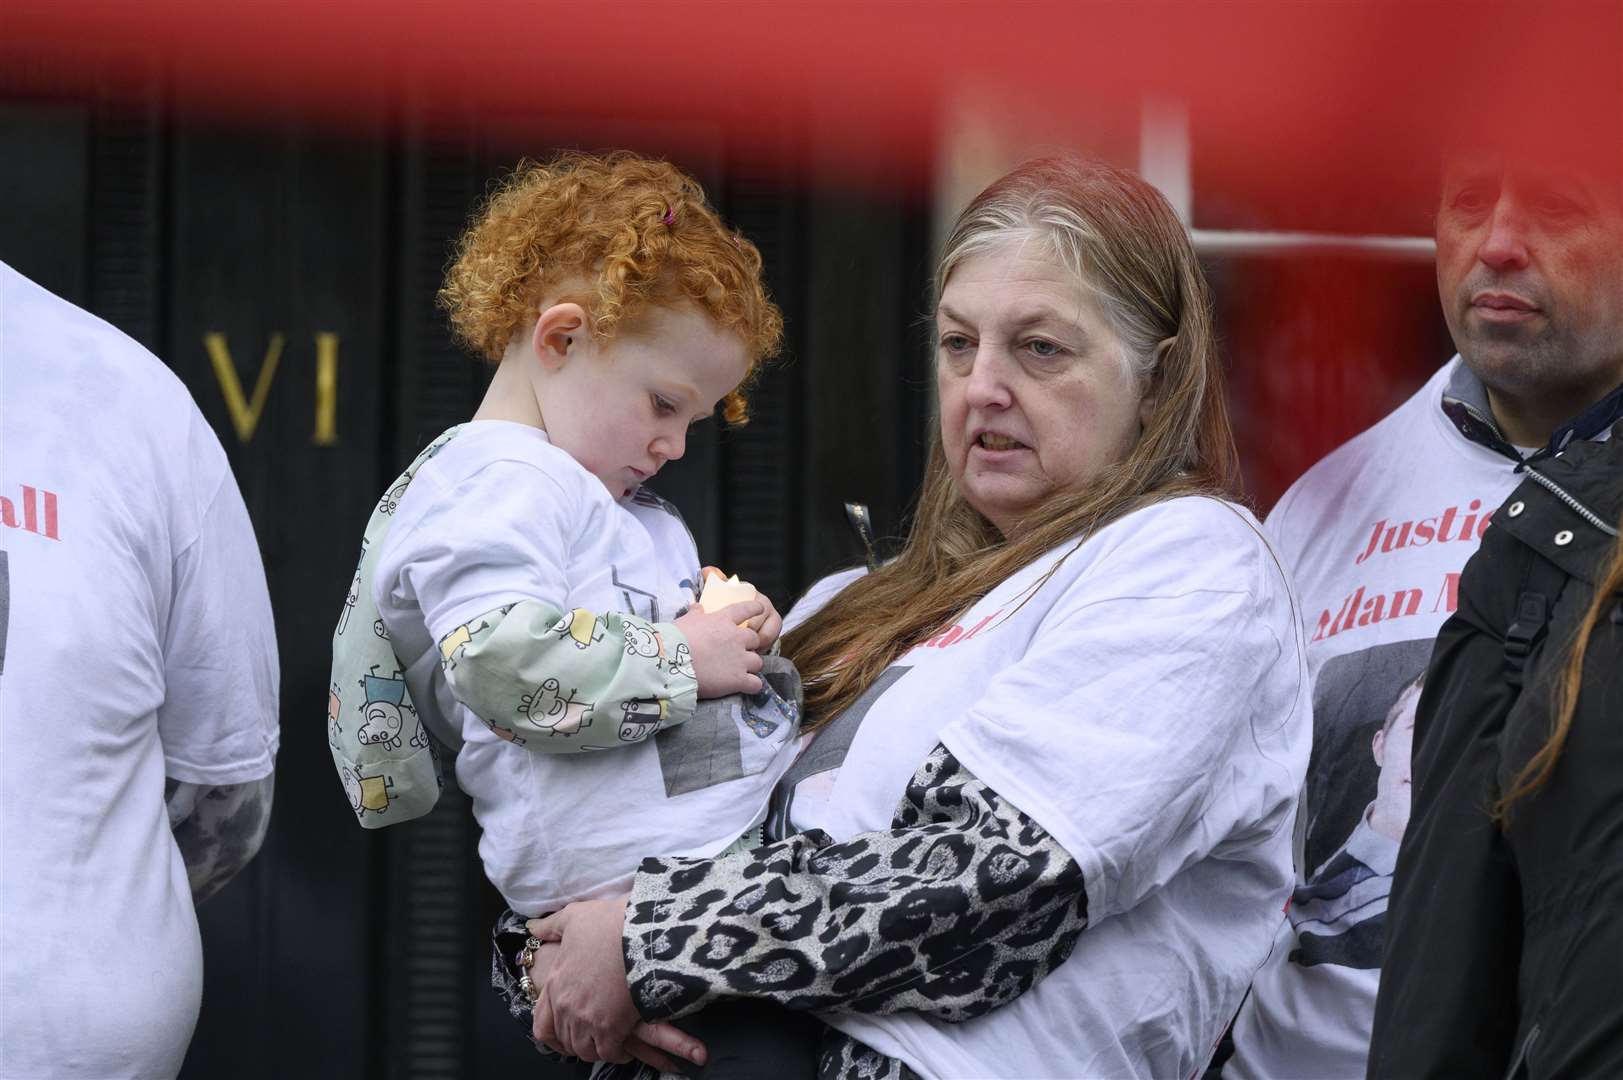 Allan Marshall’s aunt Sharon McFadyen holding his nephew Kieran Marshall before delivering a letter to First Minister Nicola Sturgeon at Bute House (John Linton/PA)